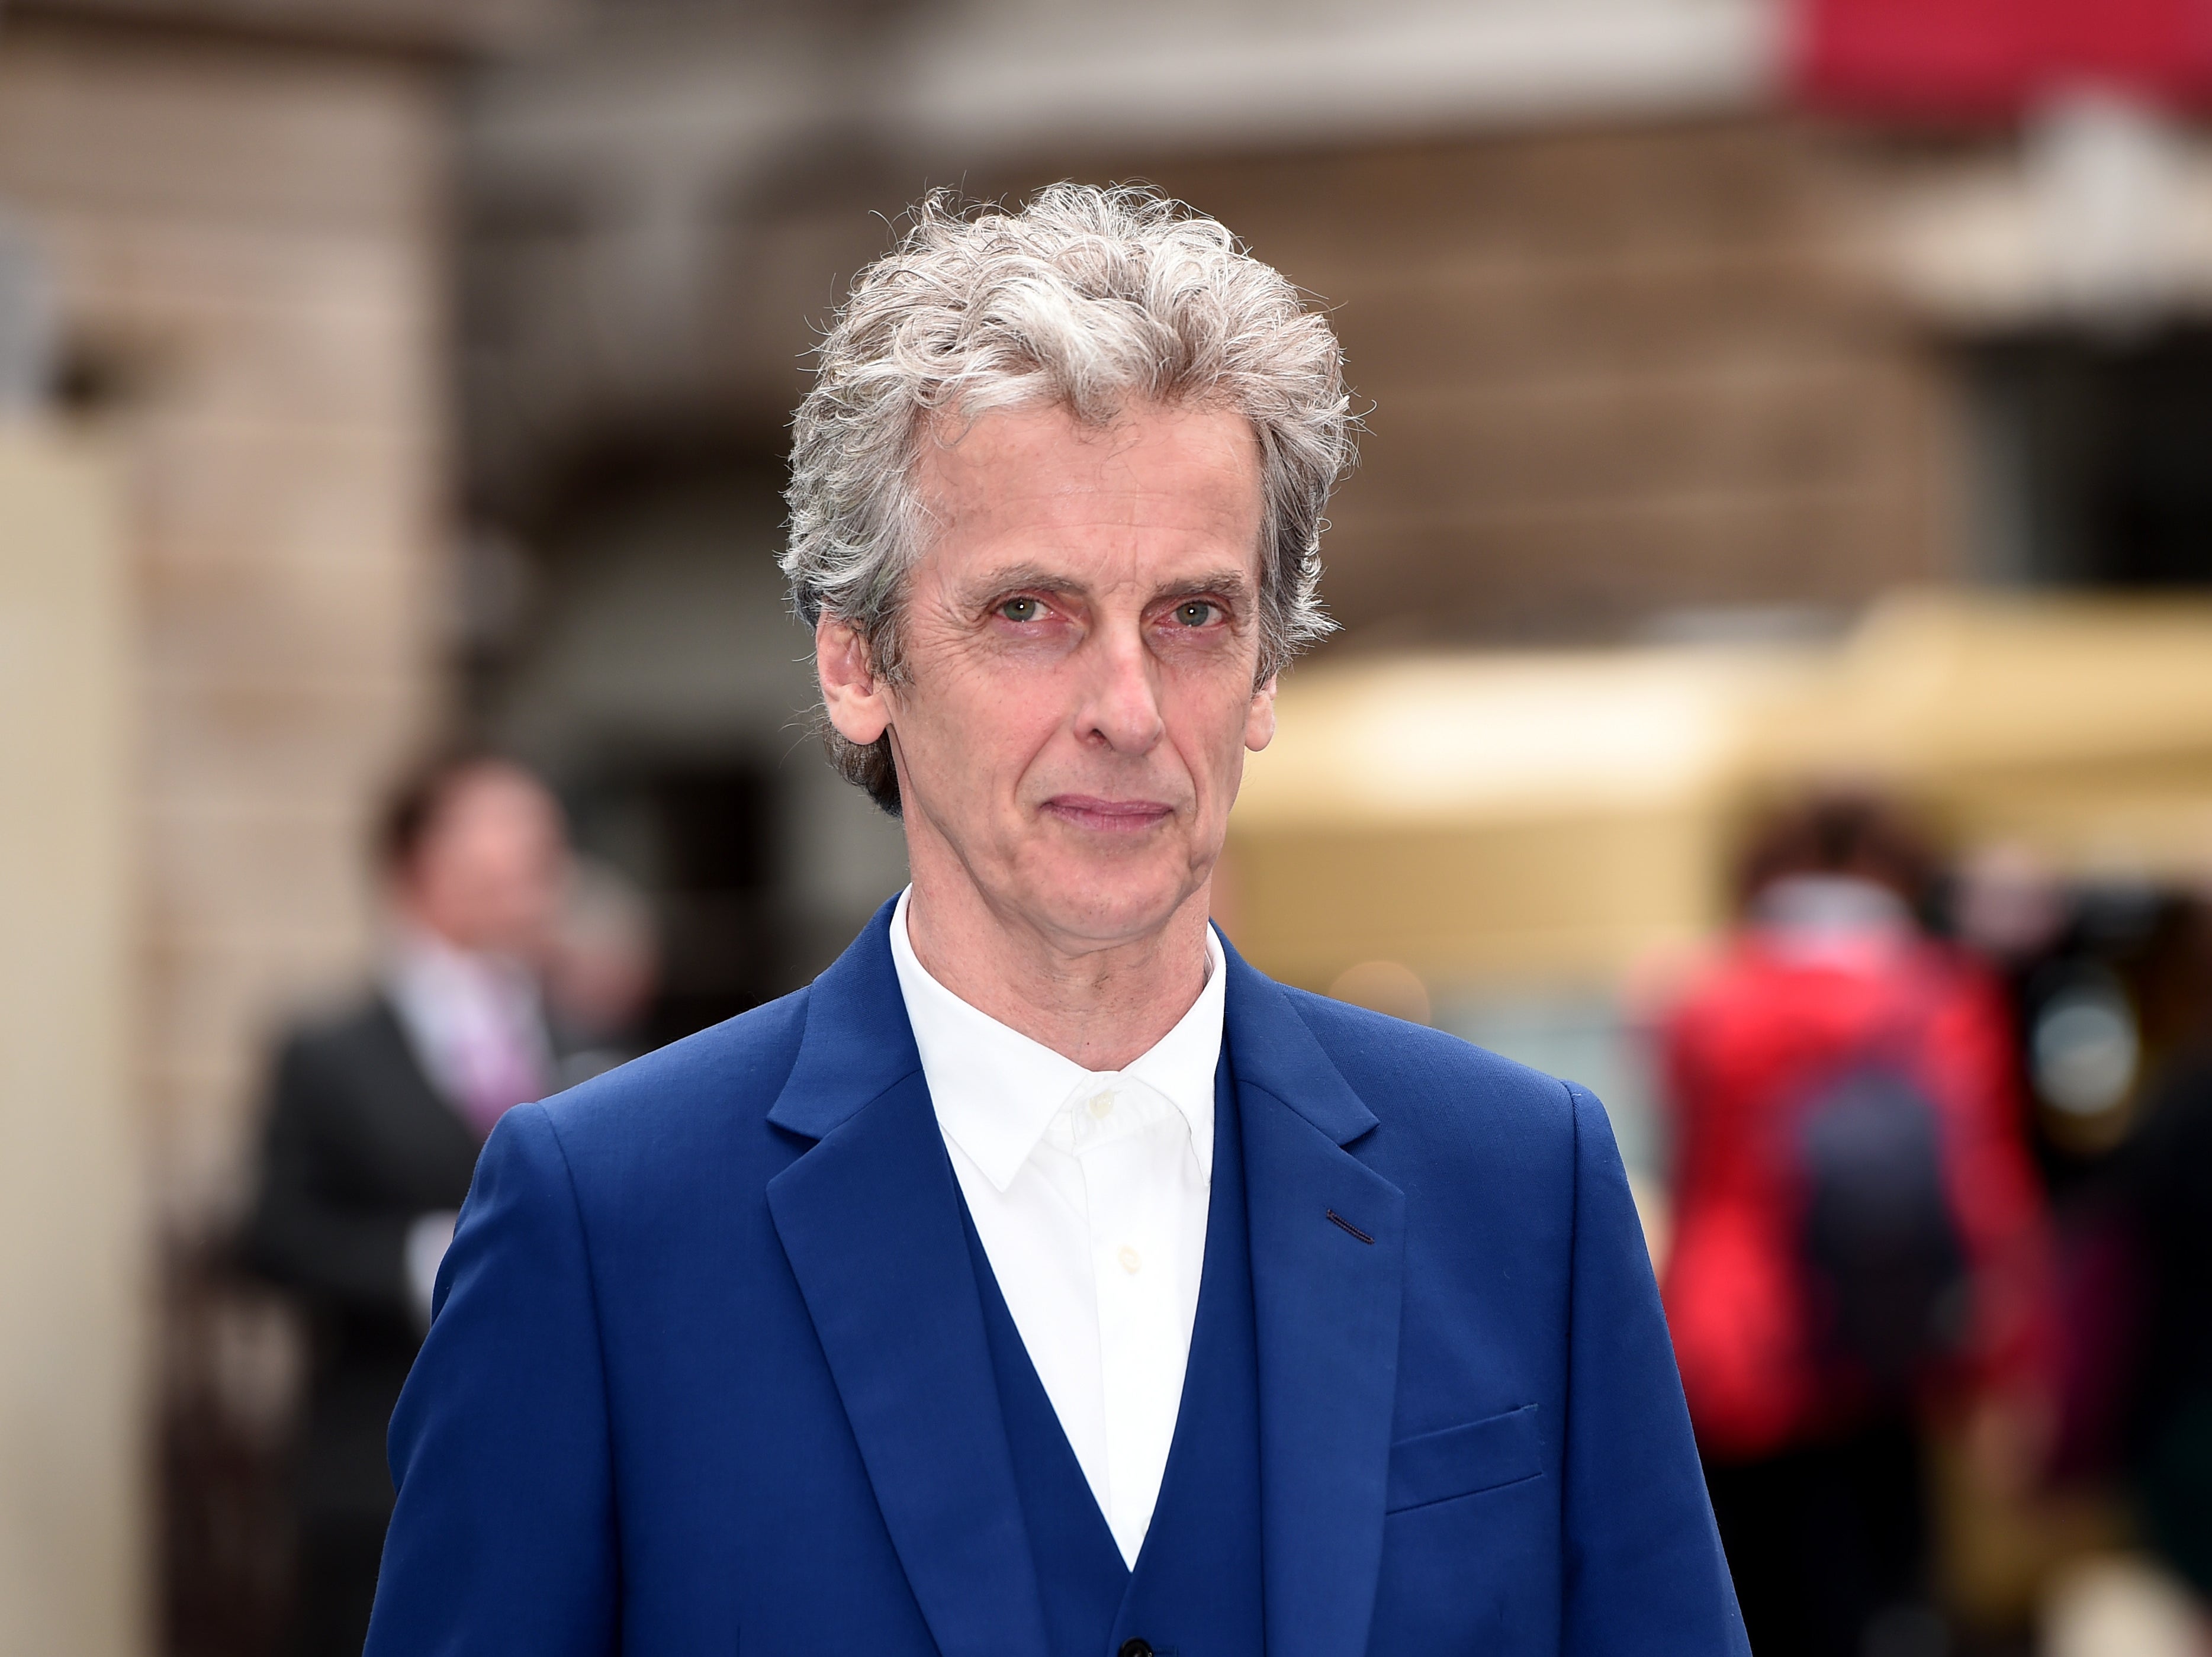 Actor Peter Capaldi backs the Greenpeace campaign